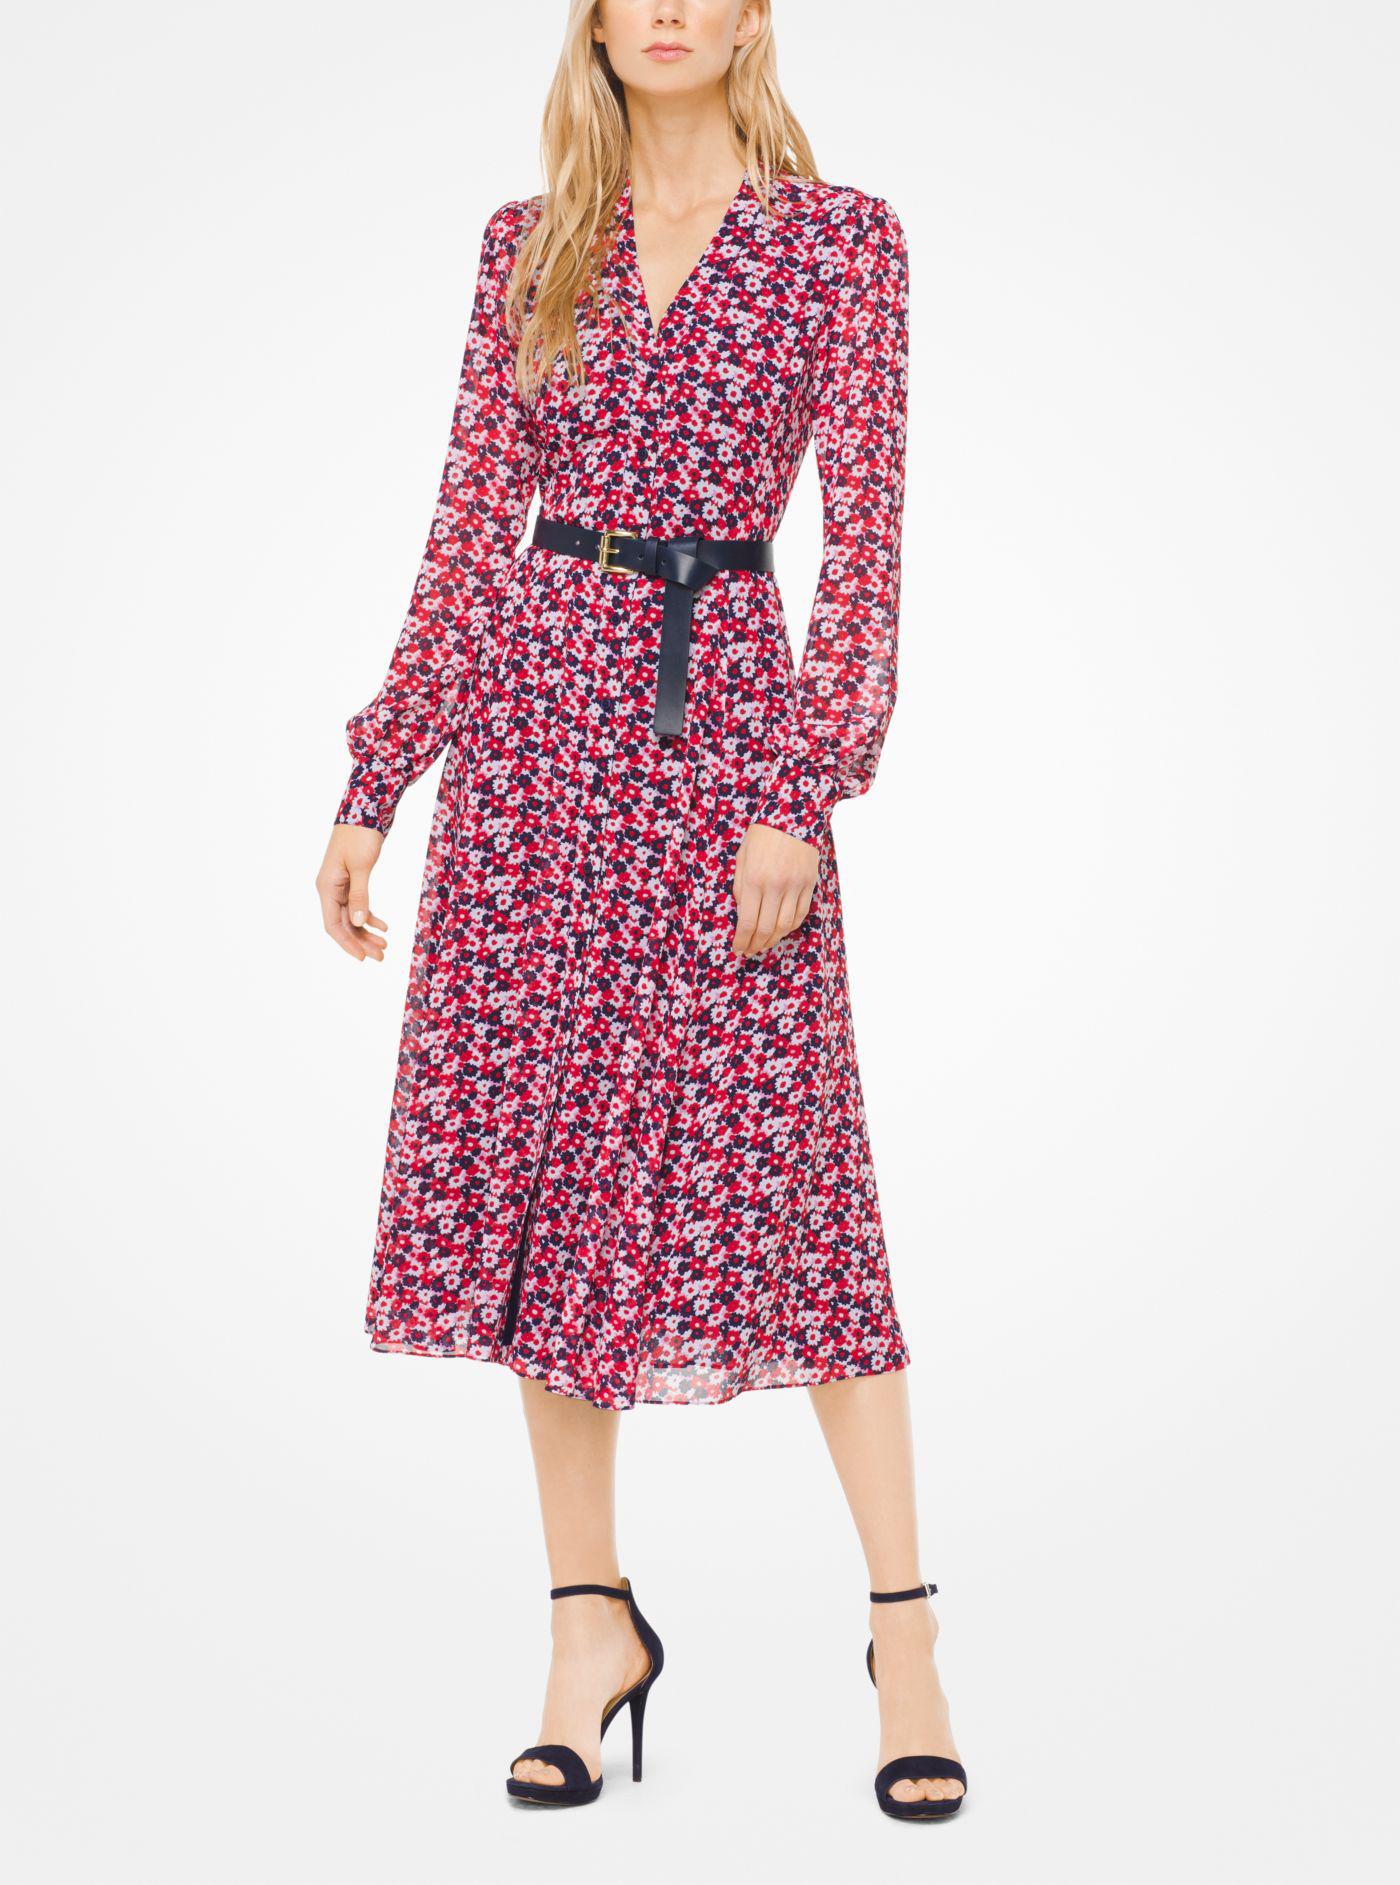 Michael Kors Synthetic Carnation Georgette Shirtdress - Lyst